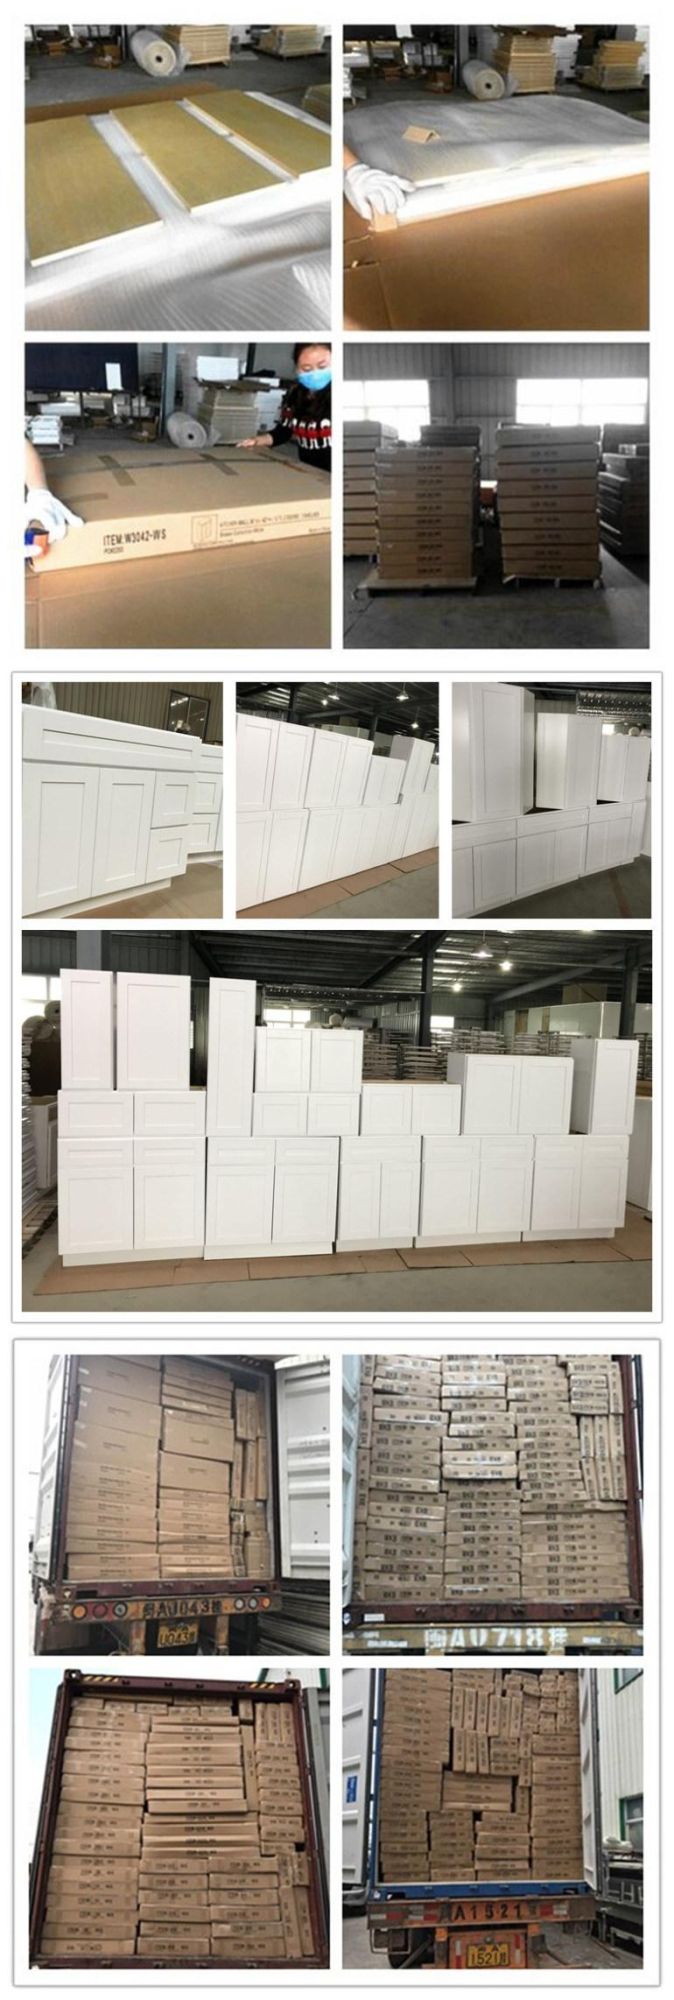 China Factory Direct Sale Kitchen Cabinet with Good Price